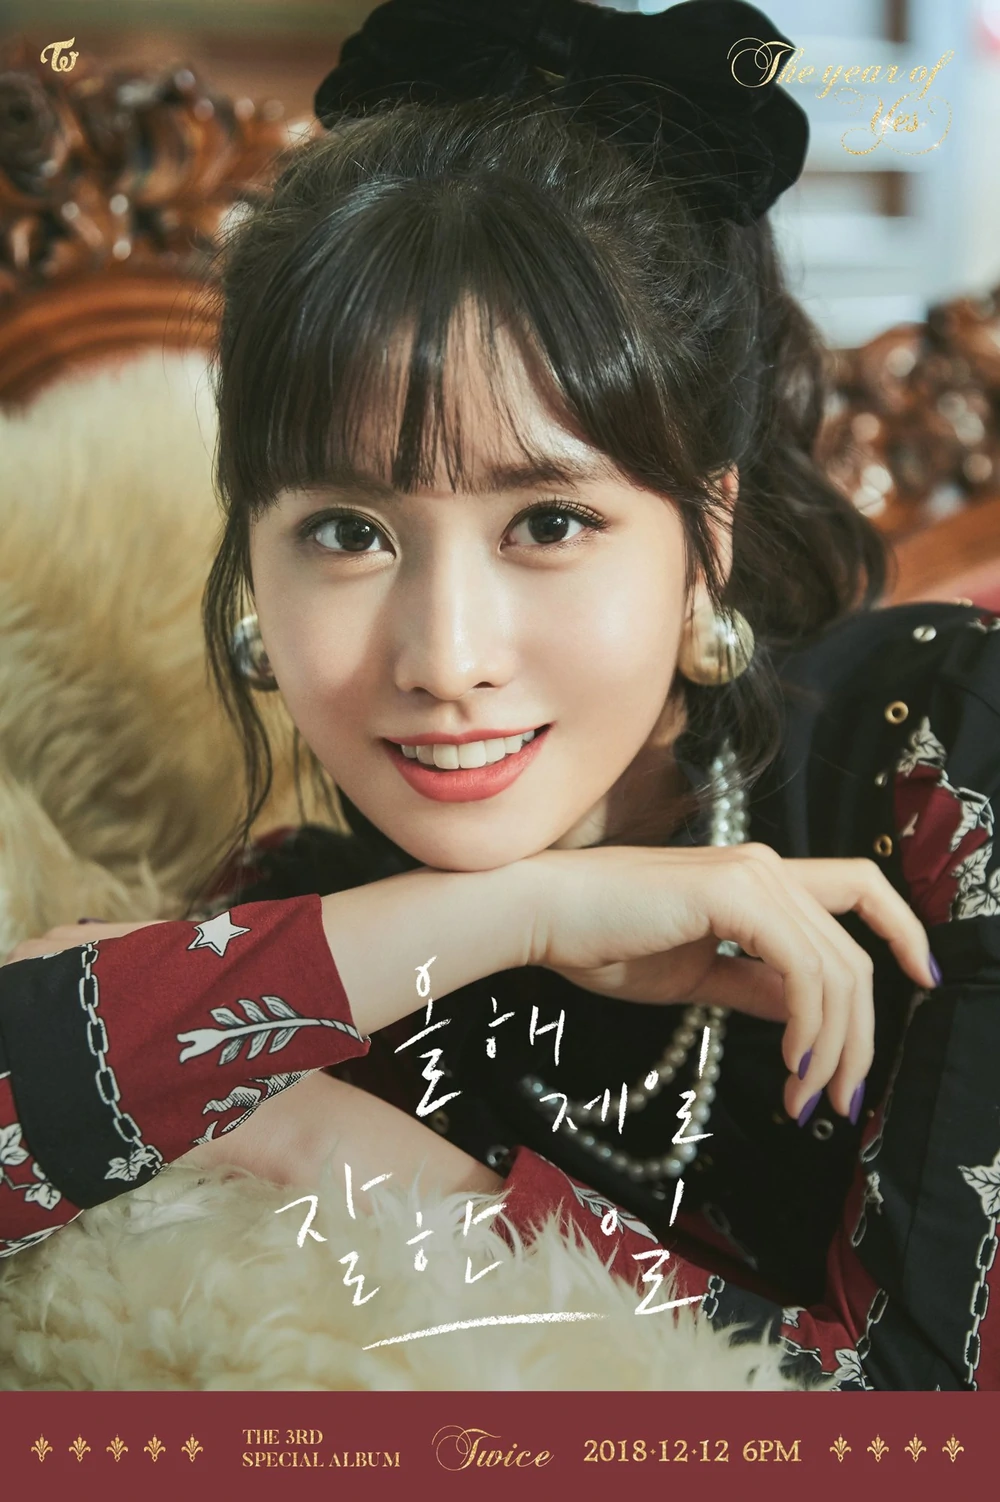 Twice Year Of Yes Momo Concept Teaser Picture Image Photo Kpop K-Concept 2